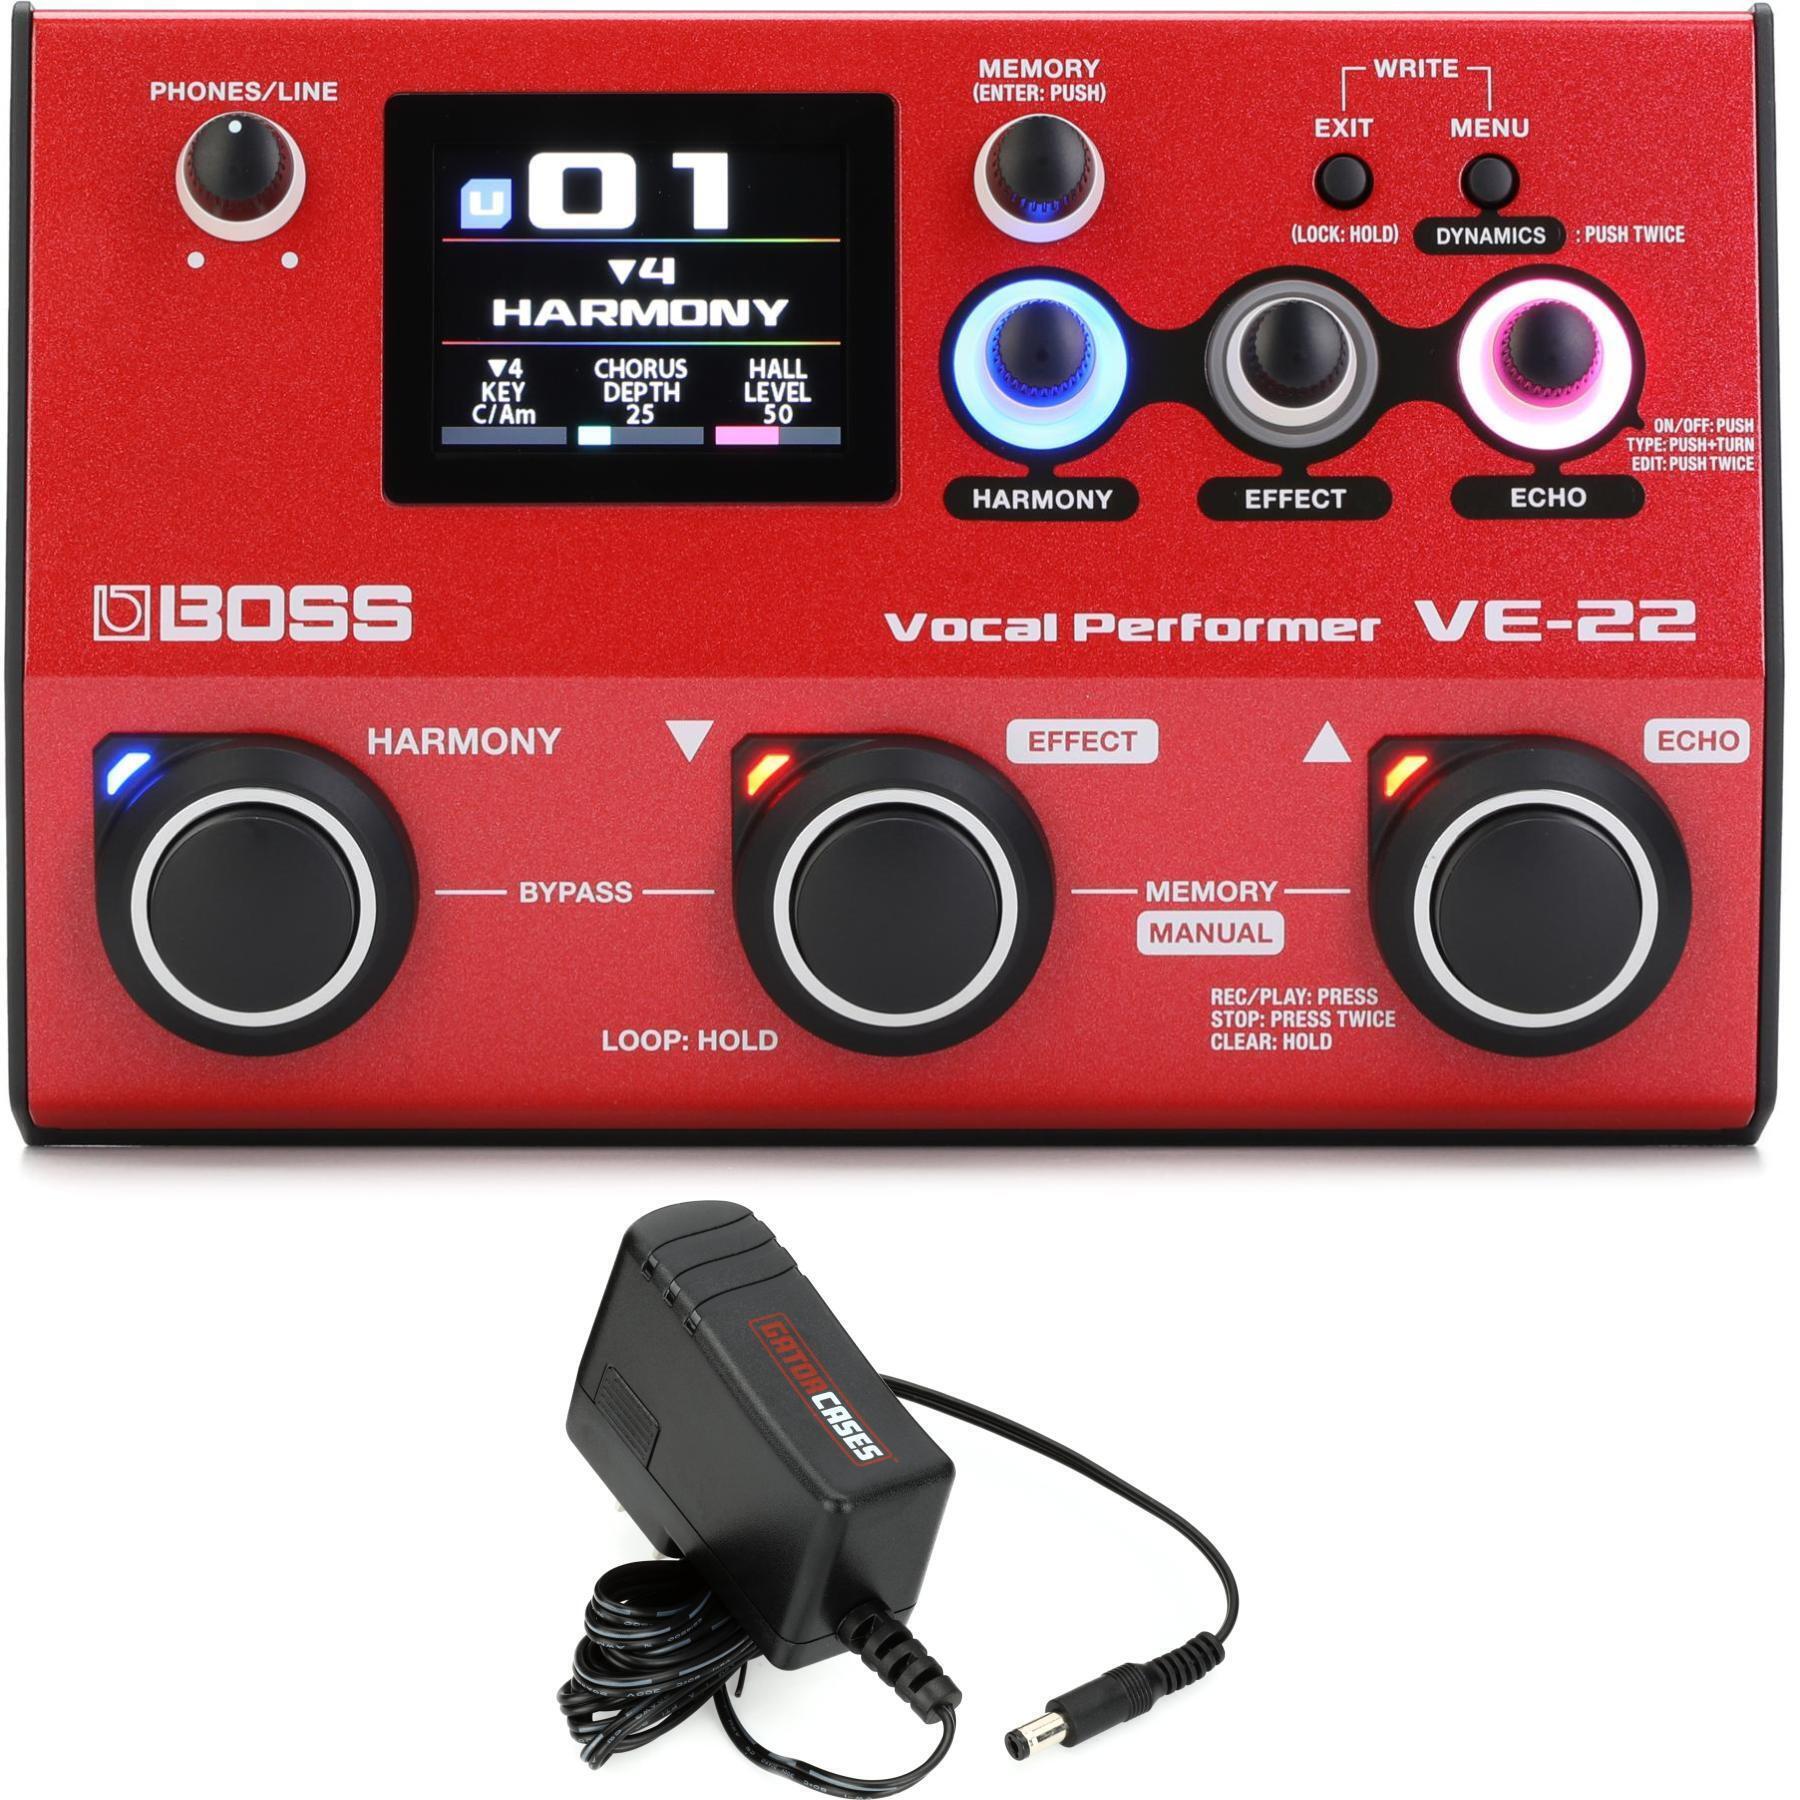 Boss VE-22 Vocal Effects and Looper Pedal | Sweetwater